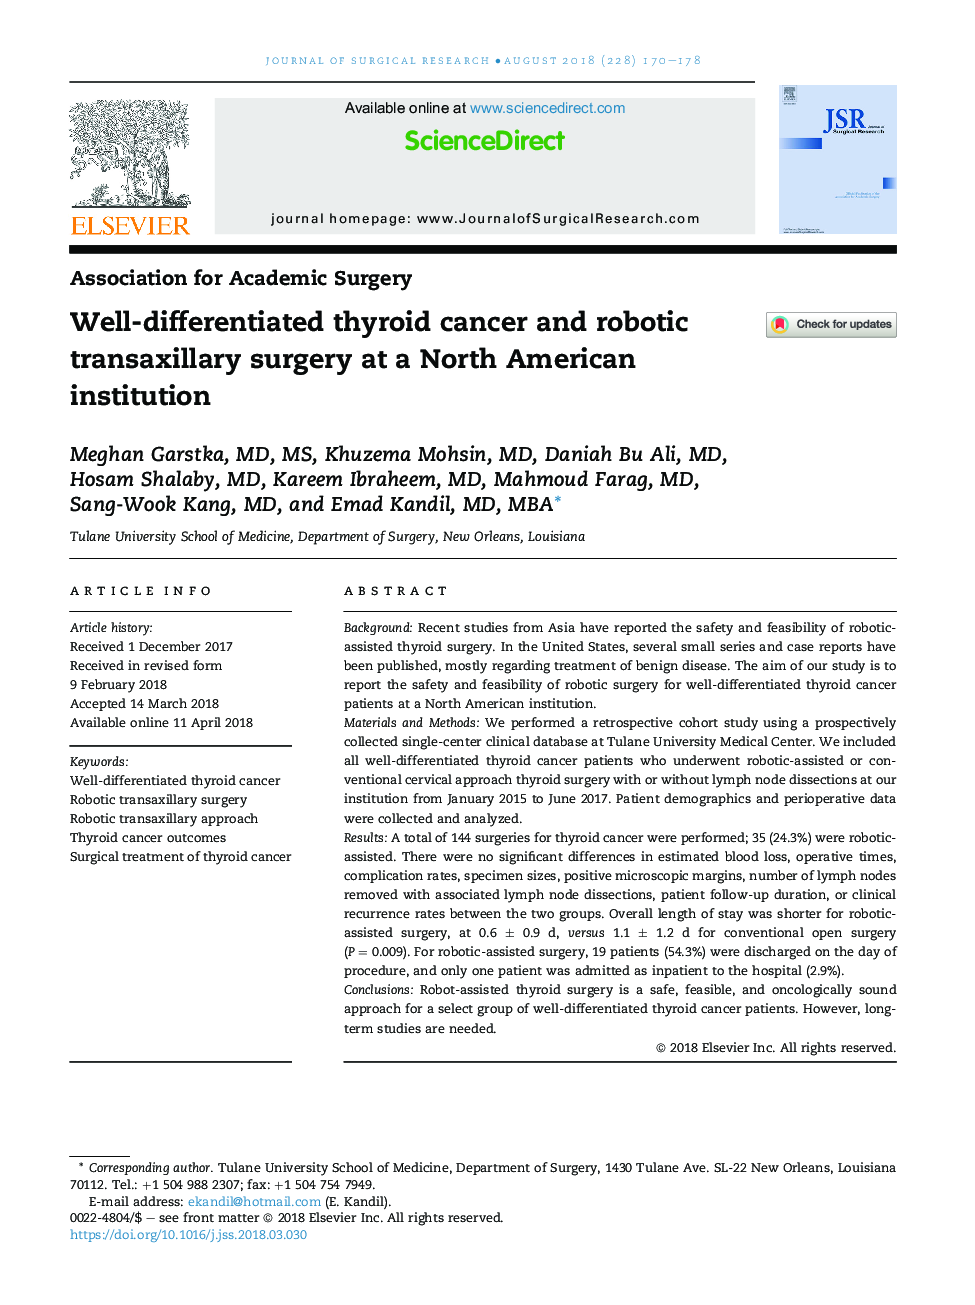 Well-differentiated thyroid cancer and robotic transaxillary surgery at a North American institution